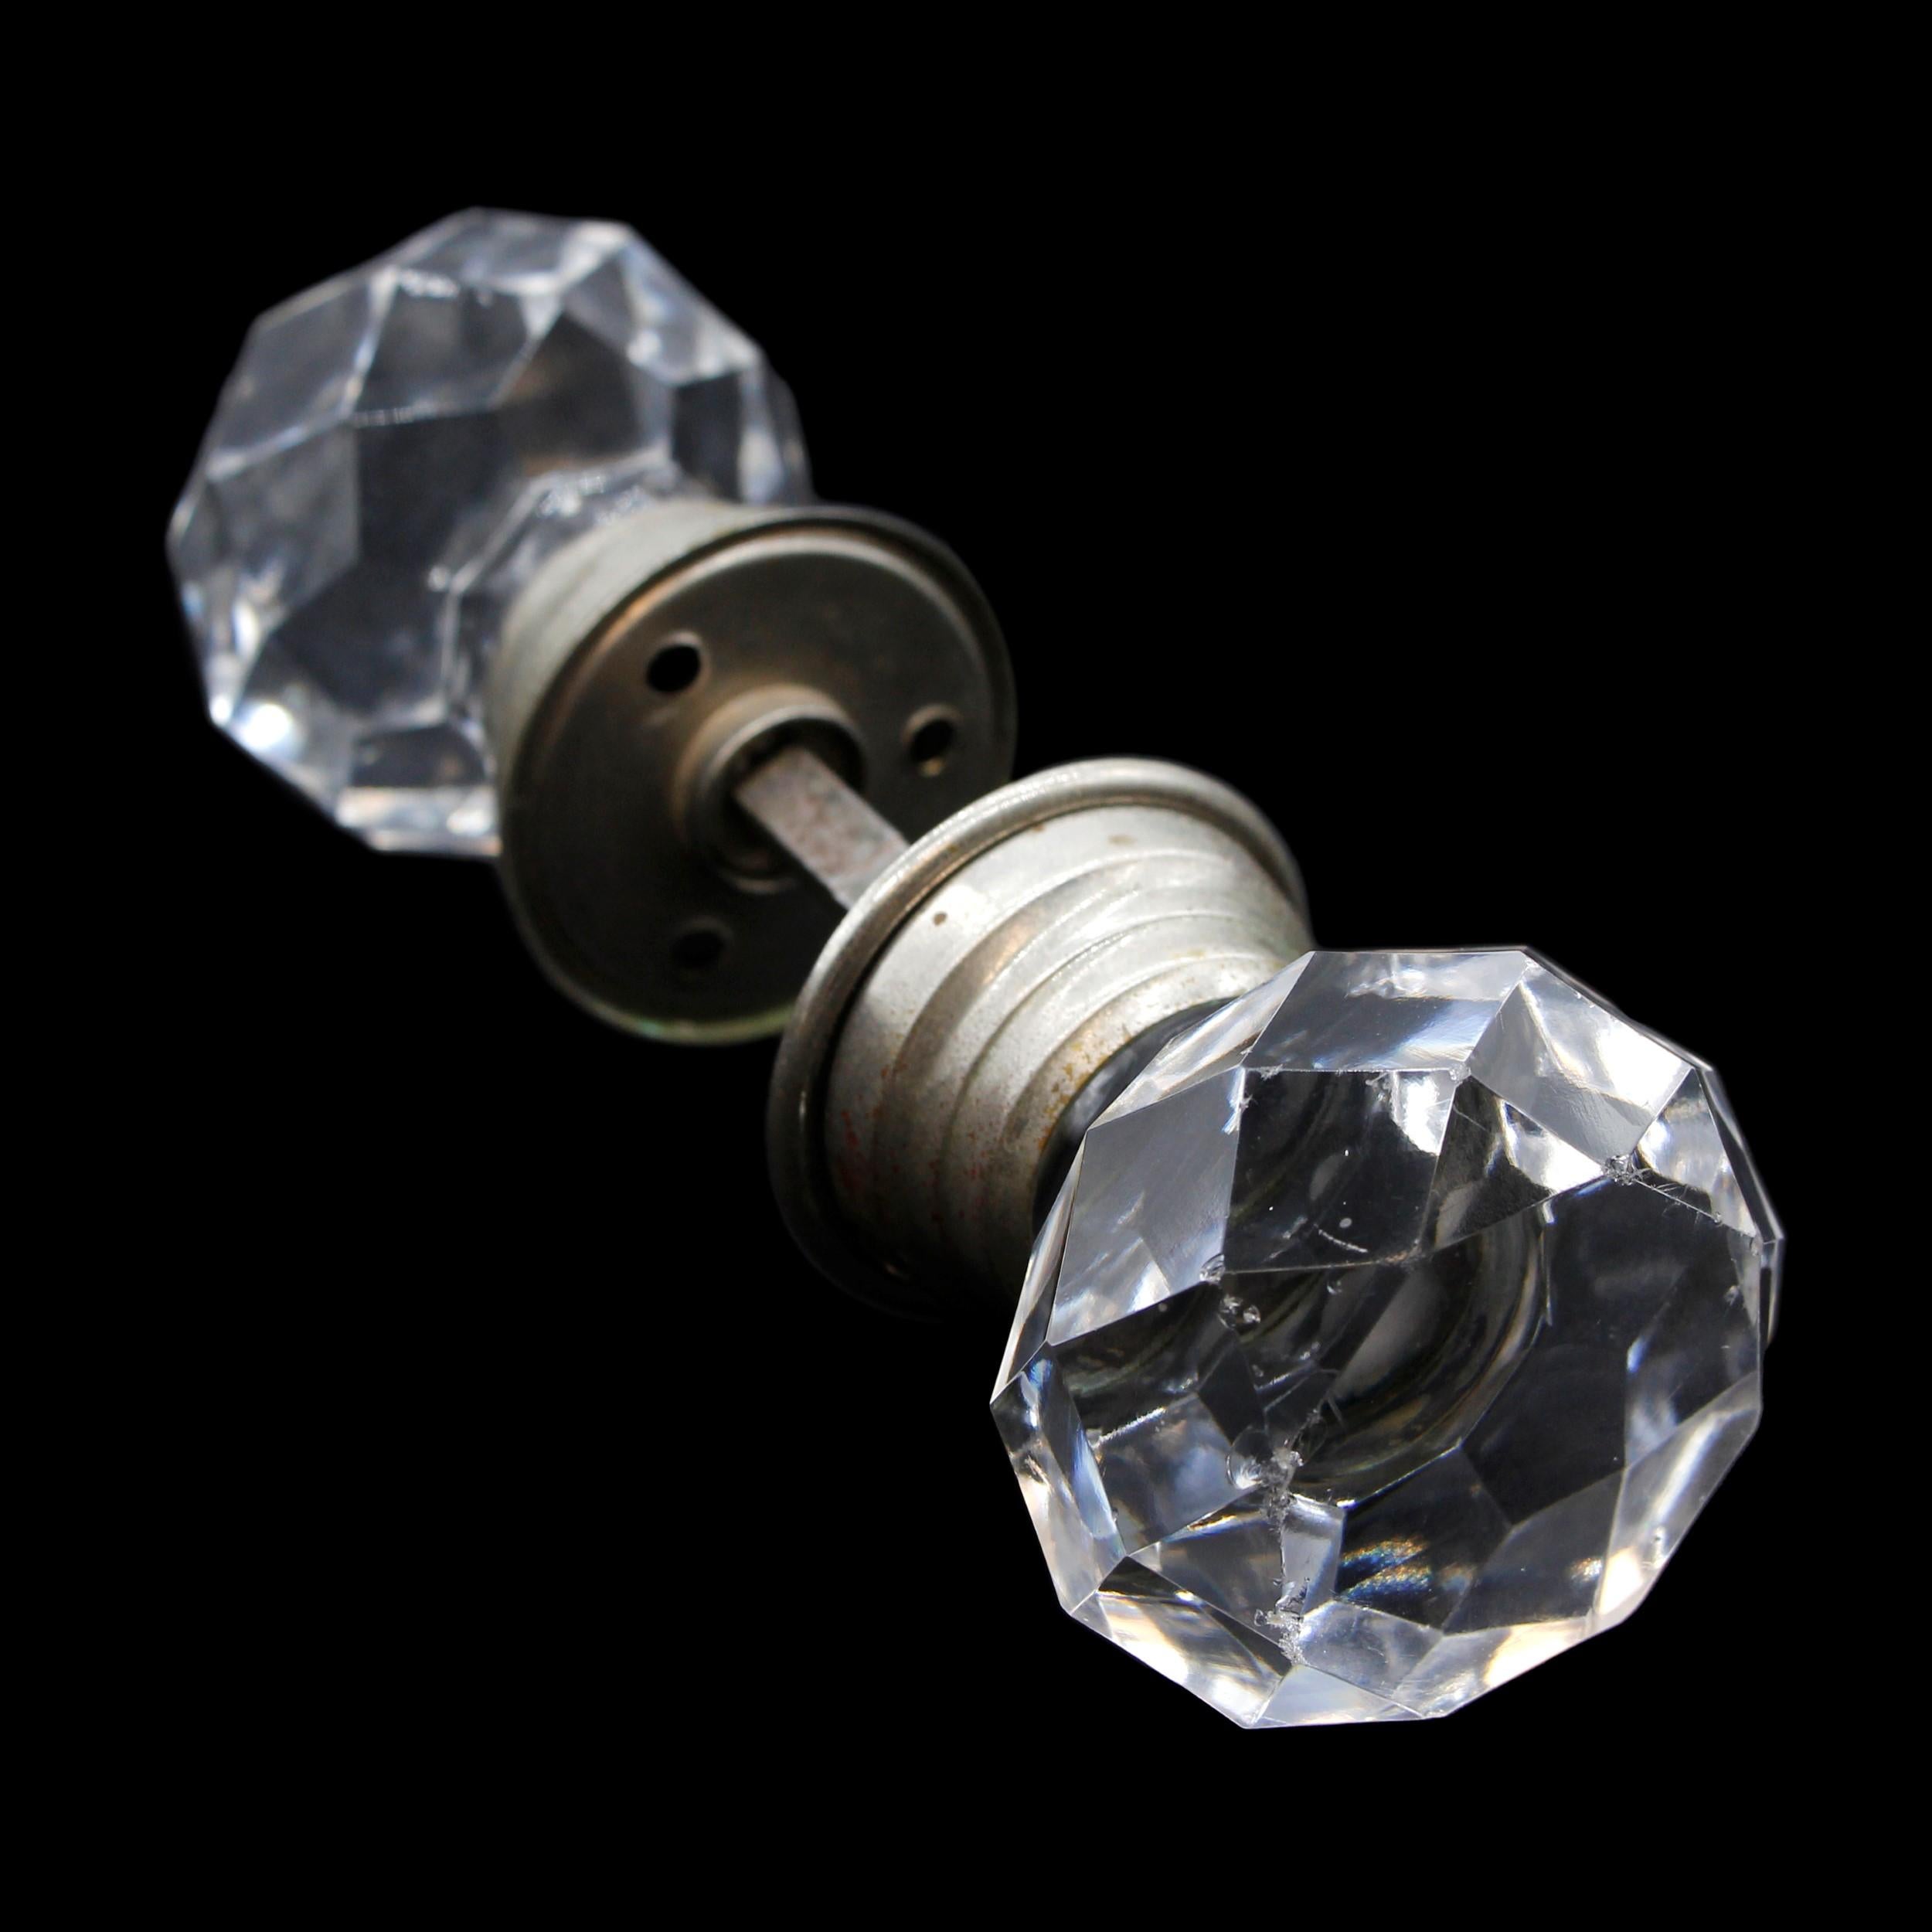 Very rare early 20th Century faceted glass antique doorknob set with nickel plated brass rosettes. Reminiscent of a diamond. Priced as a set. This can be seen at our 400 Gilligan St location in Scranton, PA.